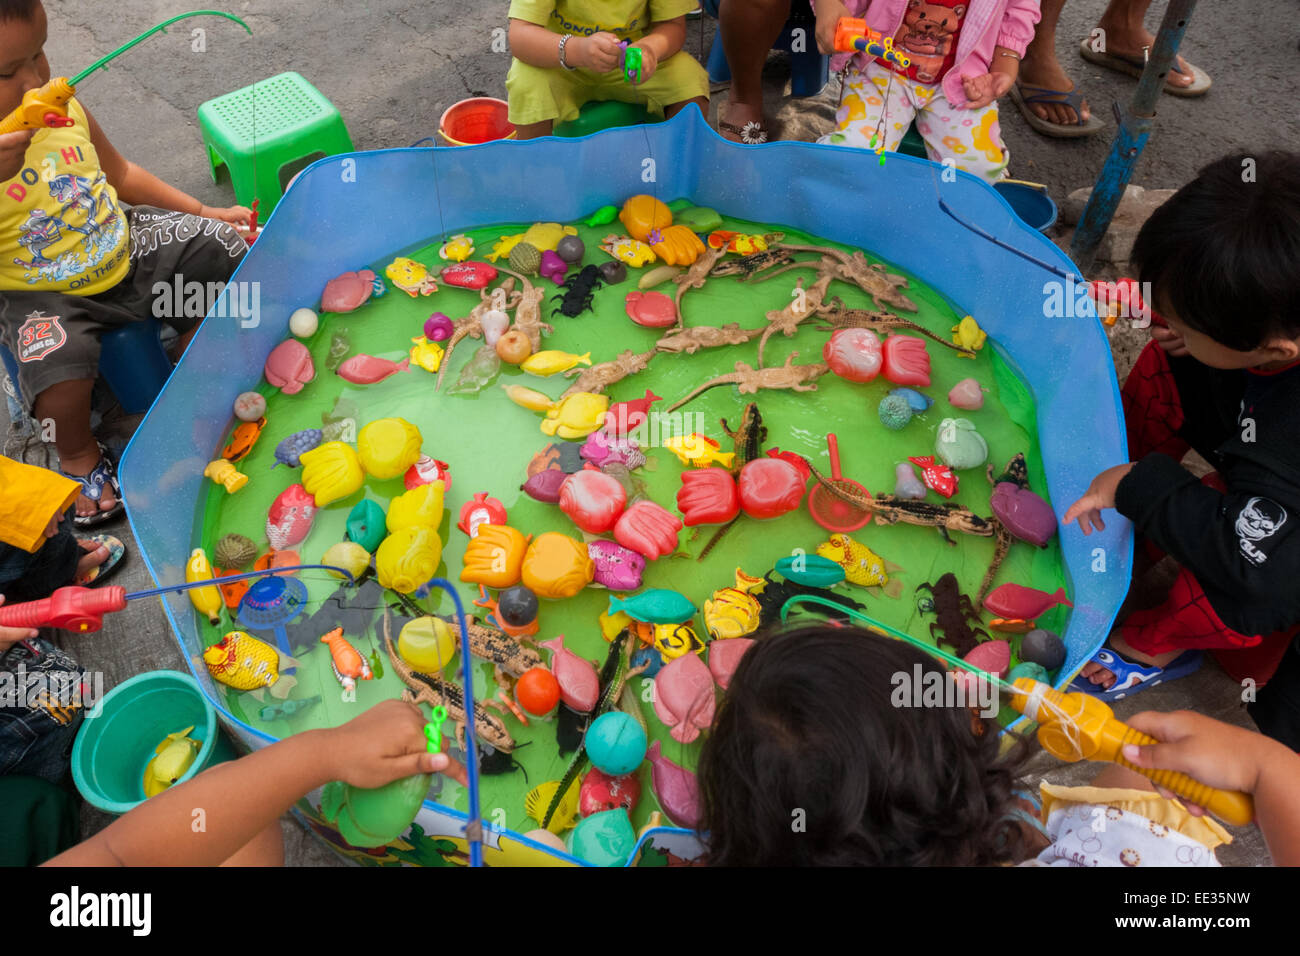 Children play fishing game on a small pond containing plastic toys at a street market near Heroes Monument in Surabaya, East Java, Indonesia. Stock Photo